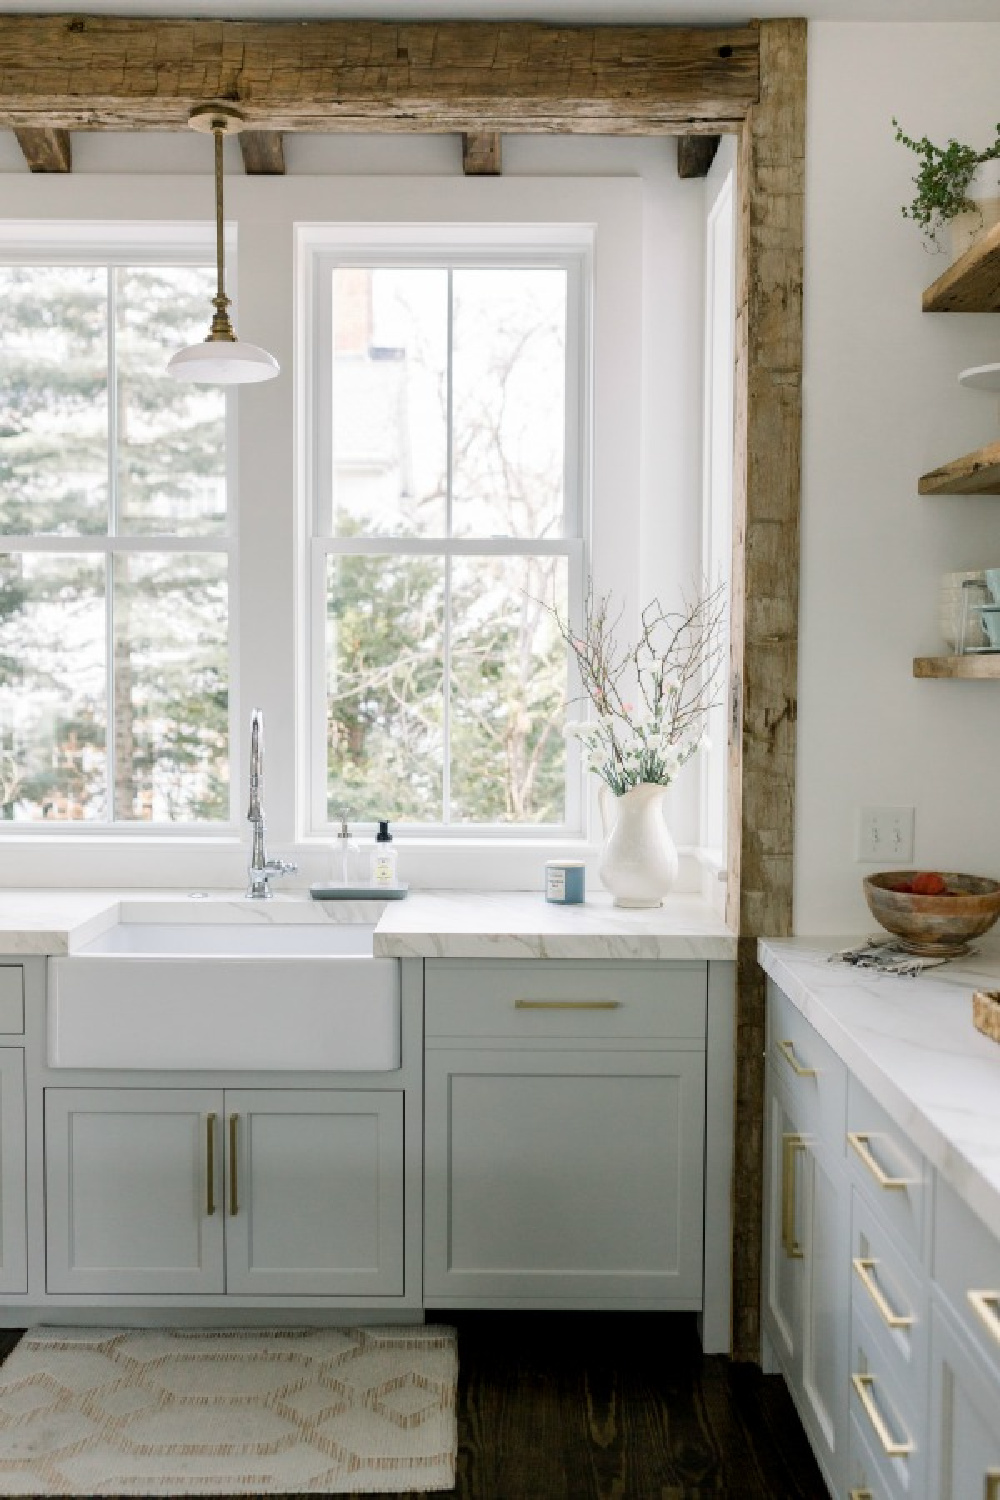 Elegant white farmhouse kitchen with Benjamin Moore Repose Grey cabinets, subway tile, gold accents, and reclaimed barn wood. Design: Finding Lovely. Wall color: Benjamin Moore Chantilly Lace.